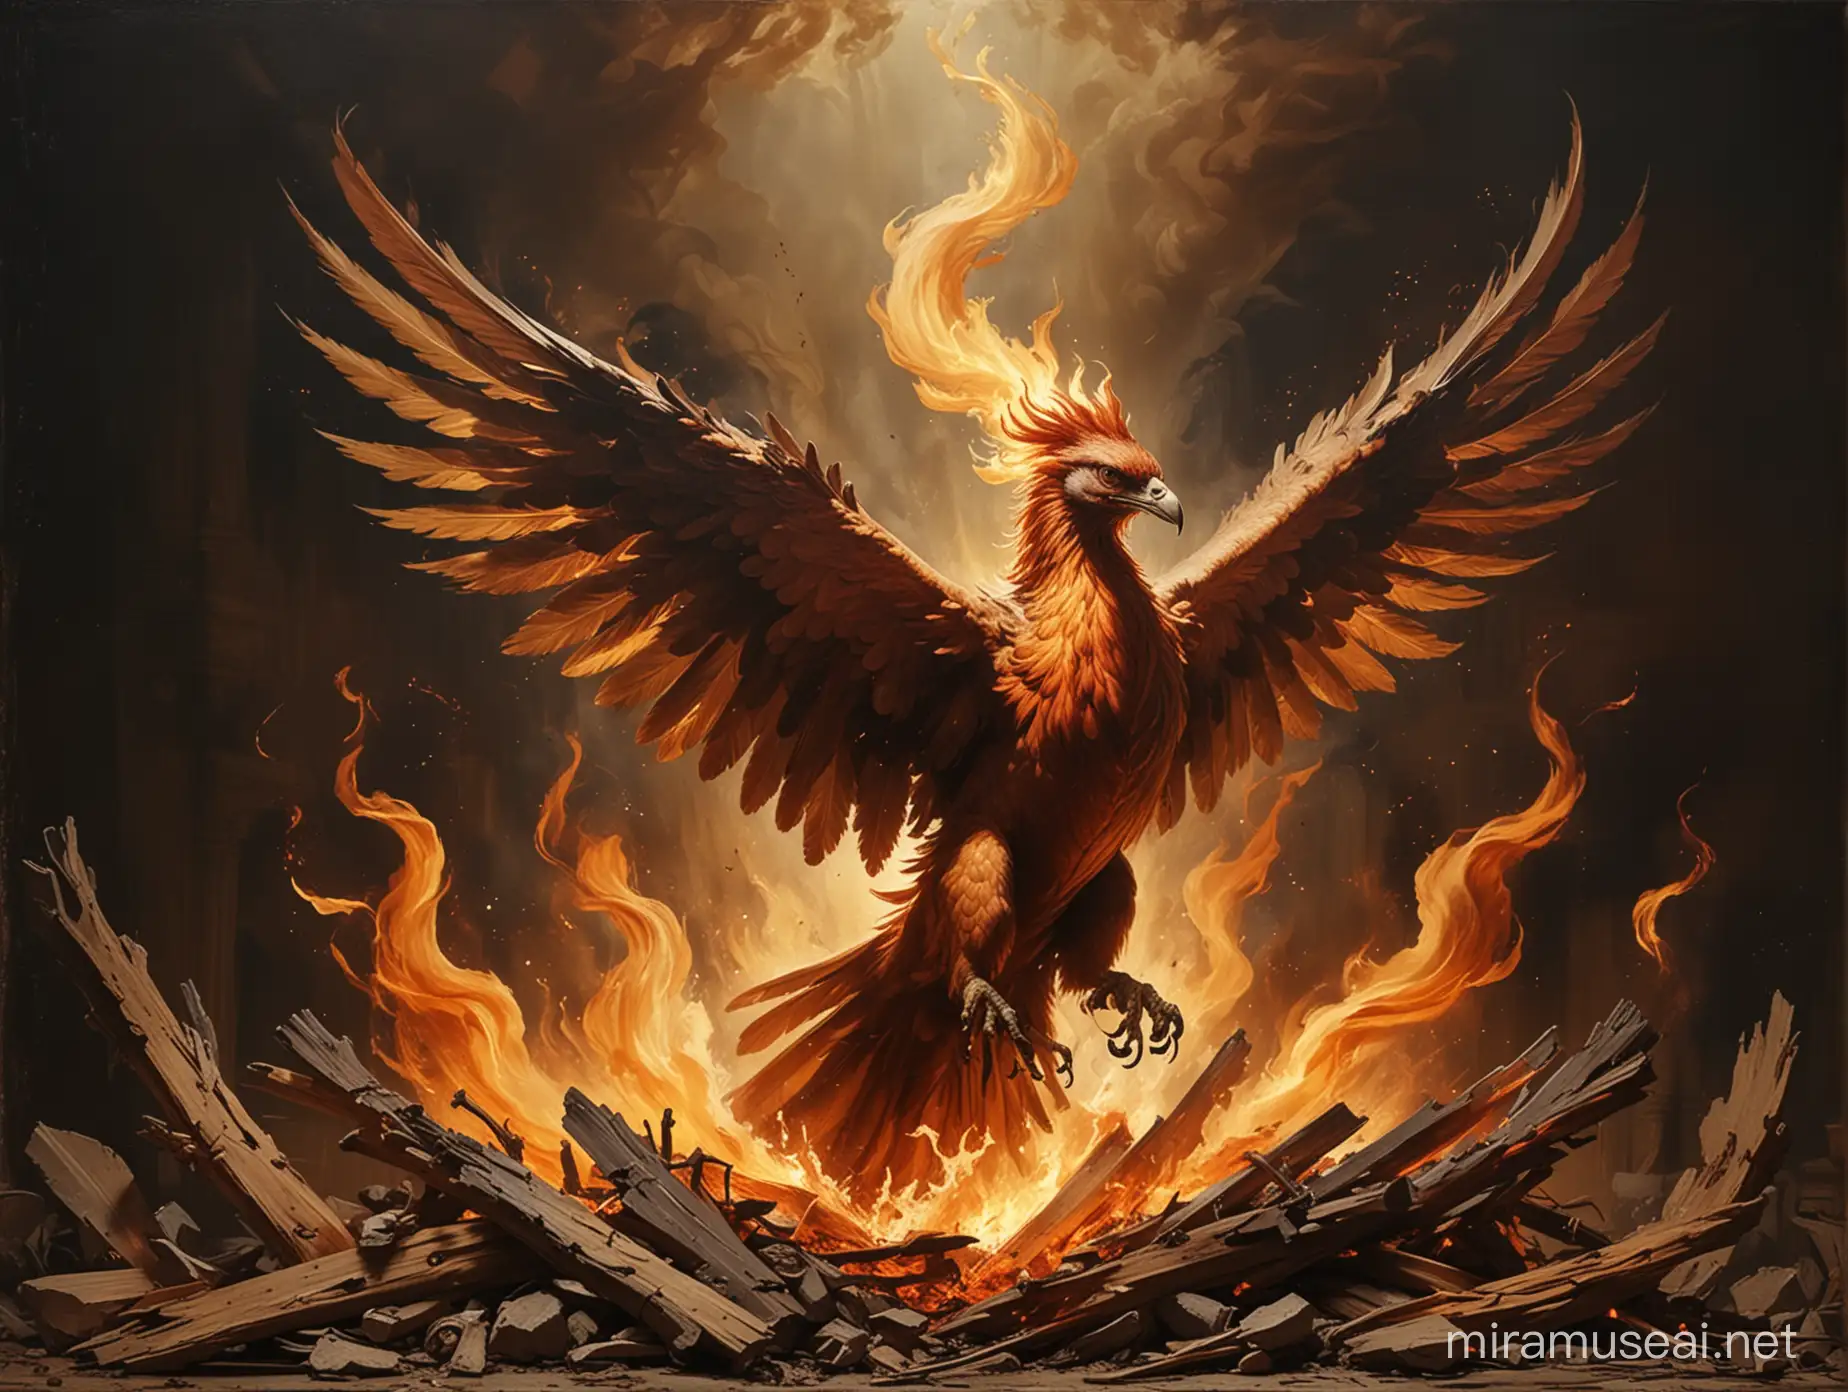 Make a picture of a Phoenix rising from the ashes in the style of the 1600 century painter Caravaggio